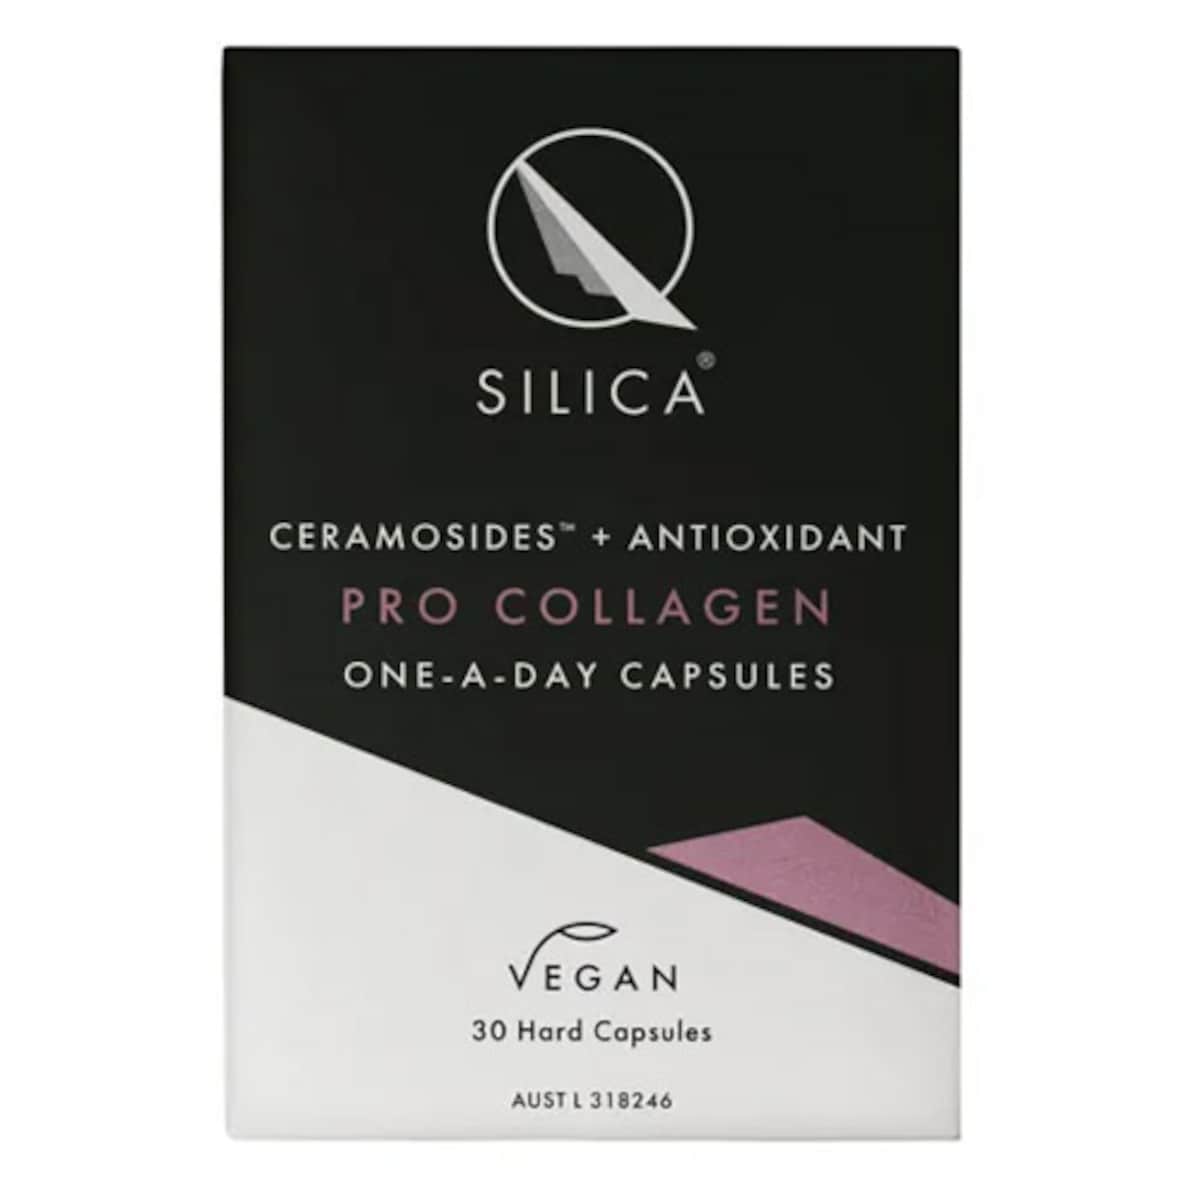 Qsilica Pro Collagen One-a-day 30 Hard Capsules